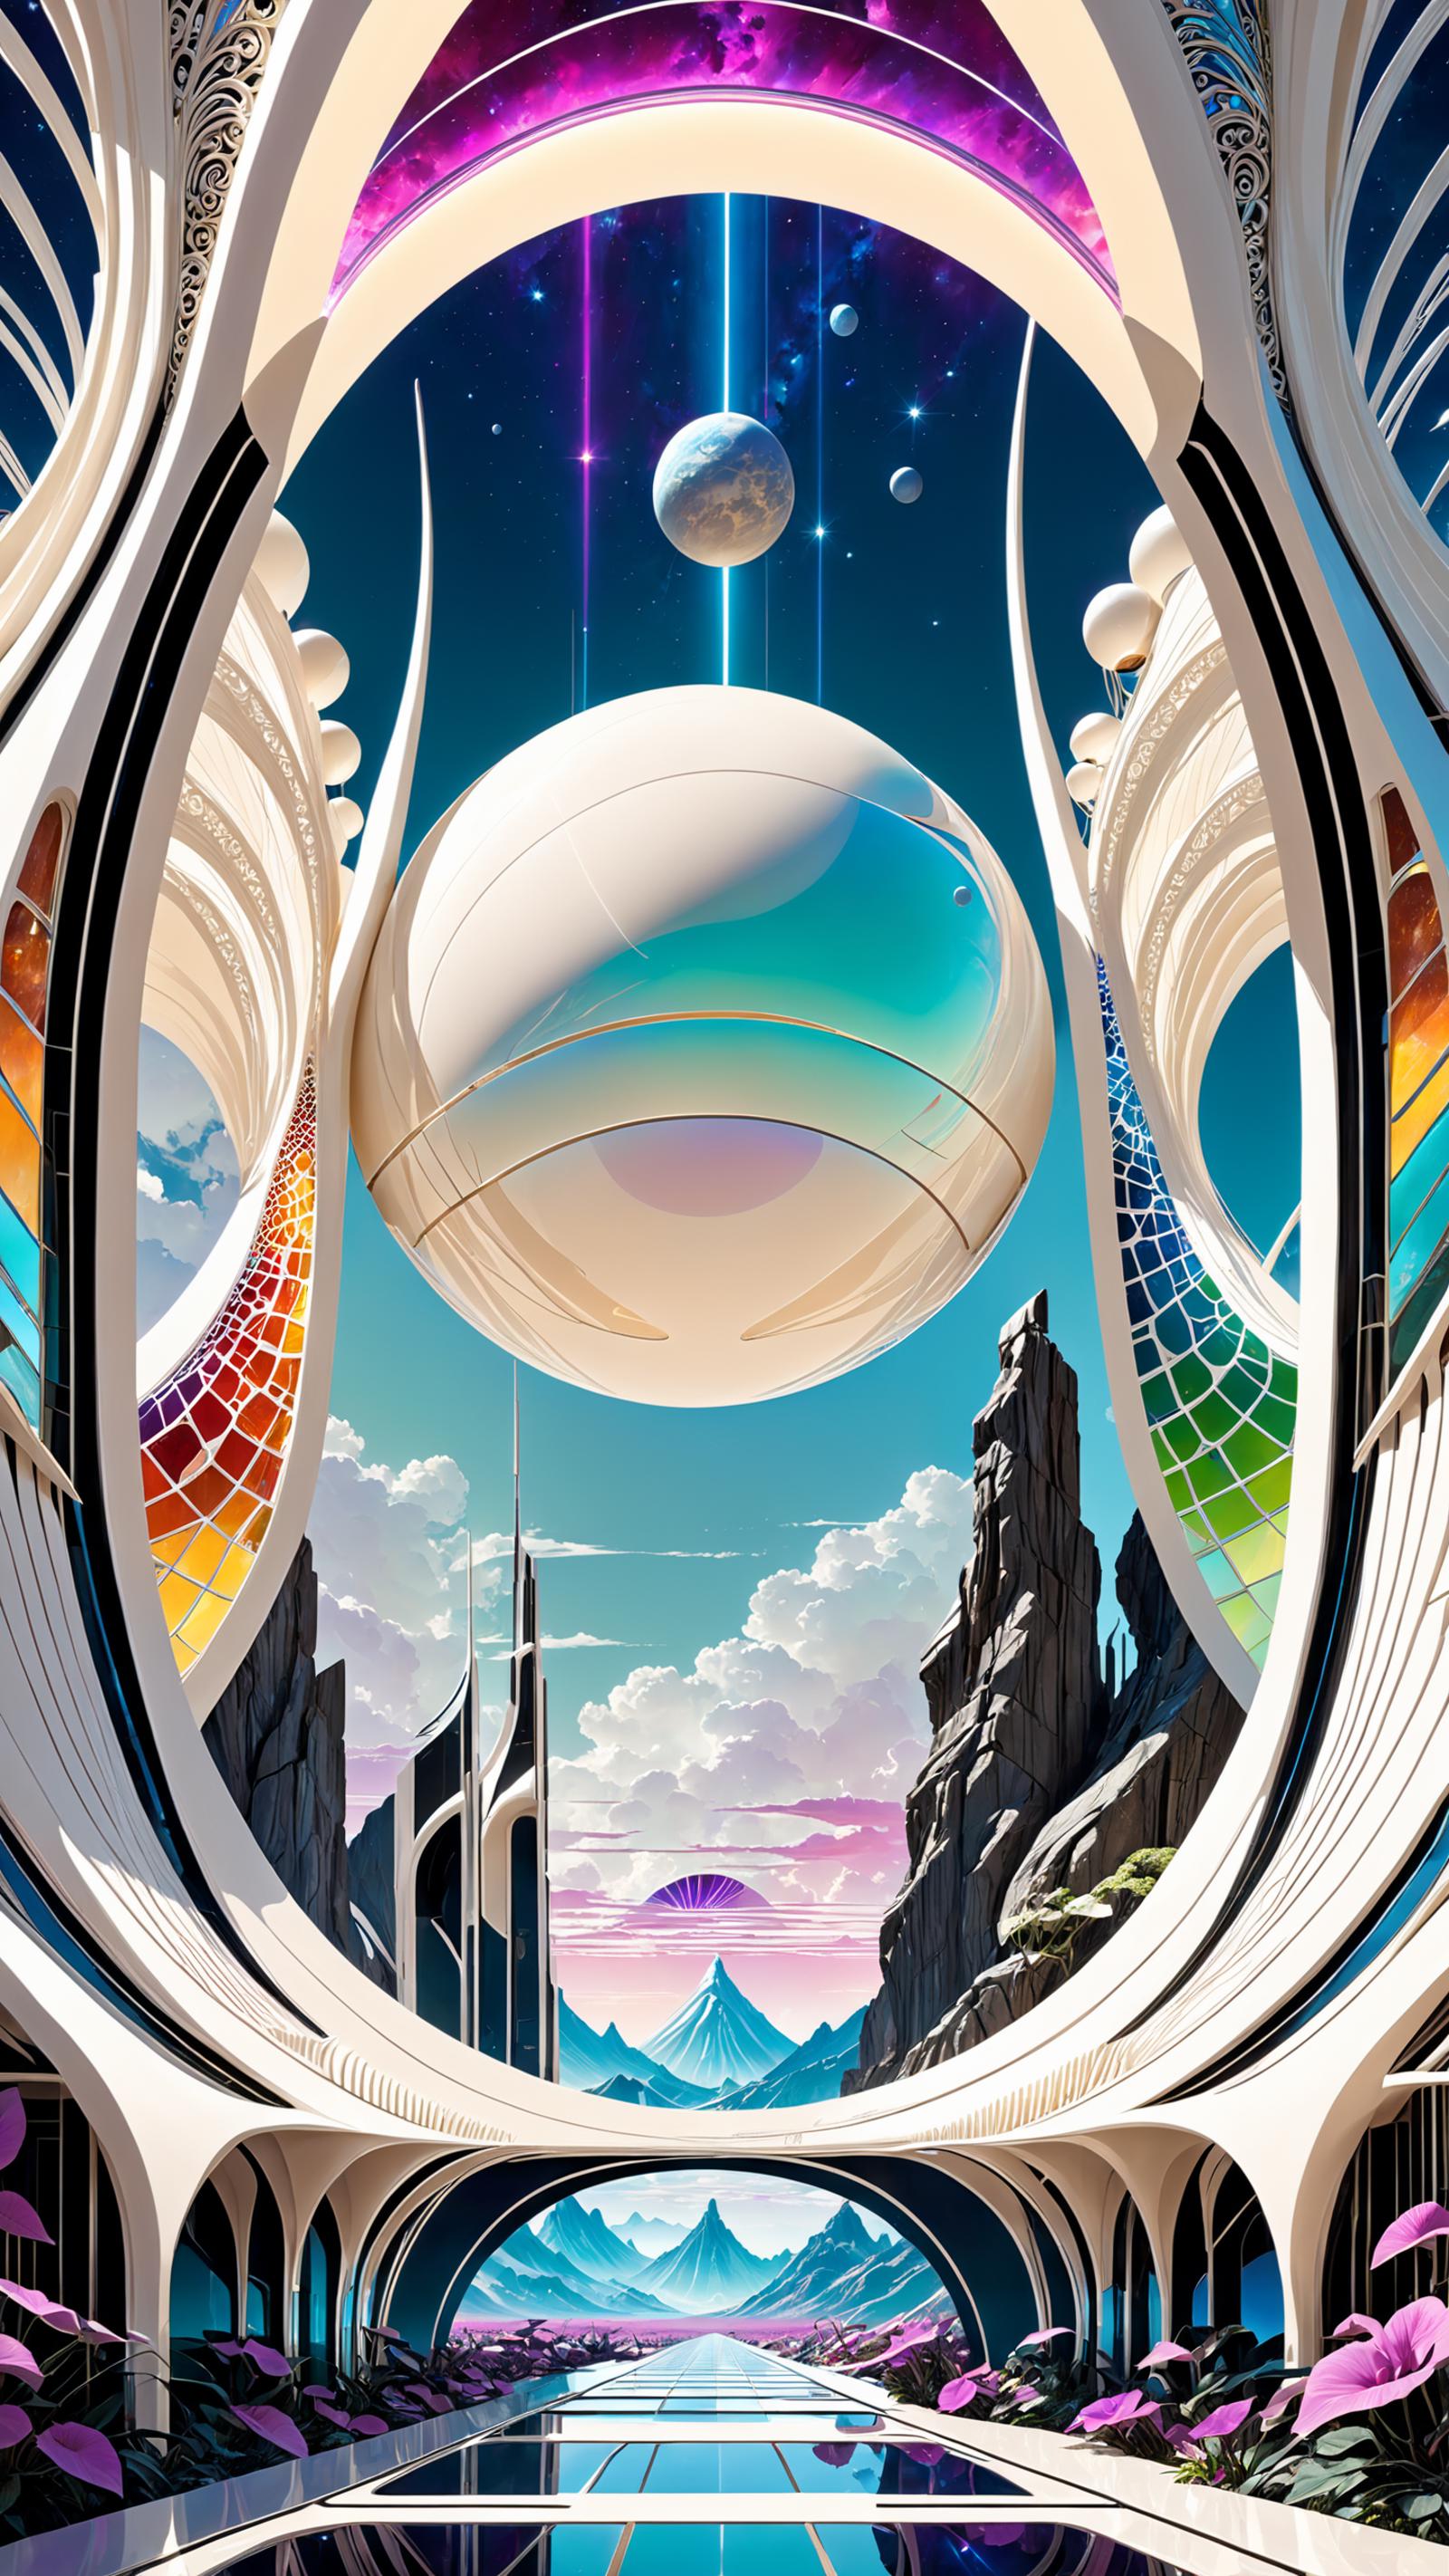 A futuristic cityscape with a large white sphere and colorful buildings.